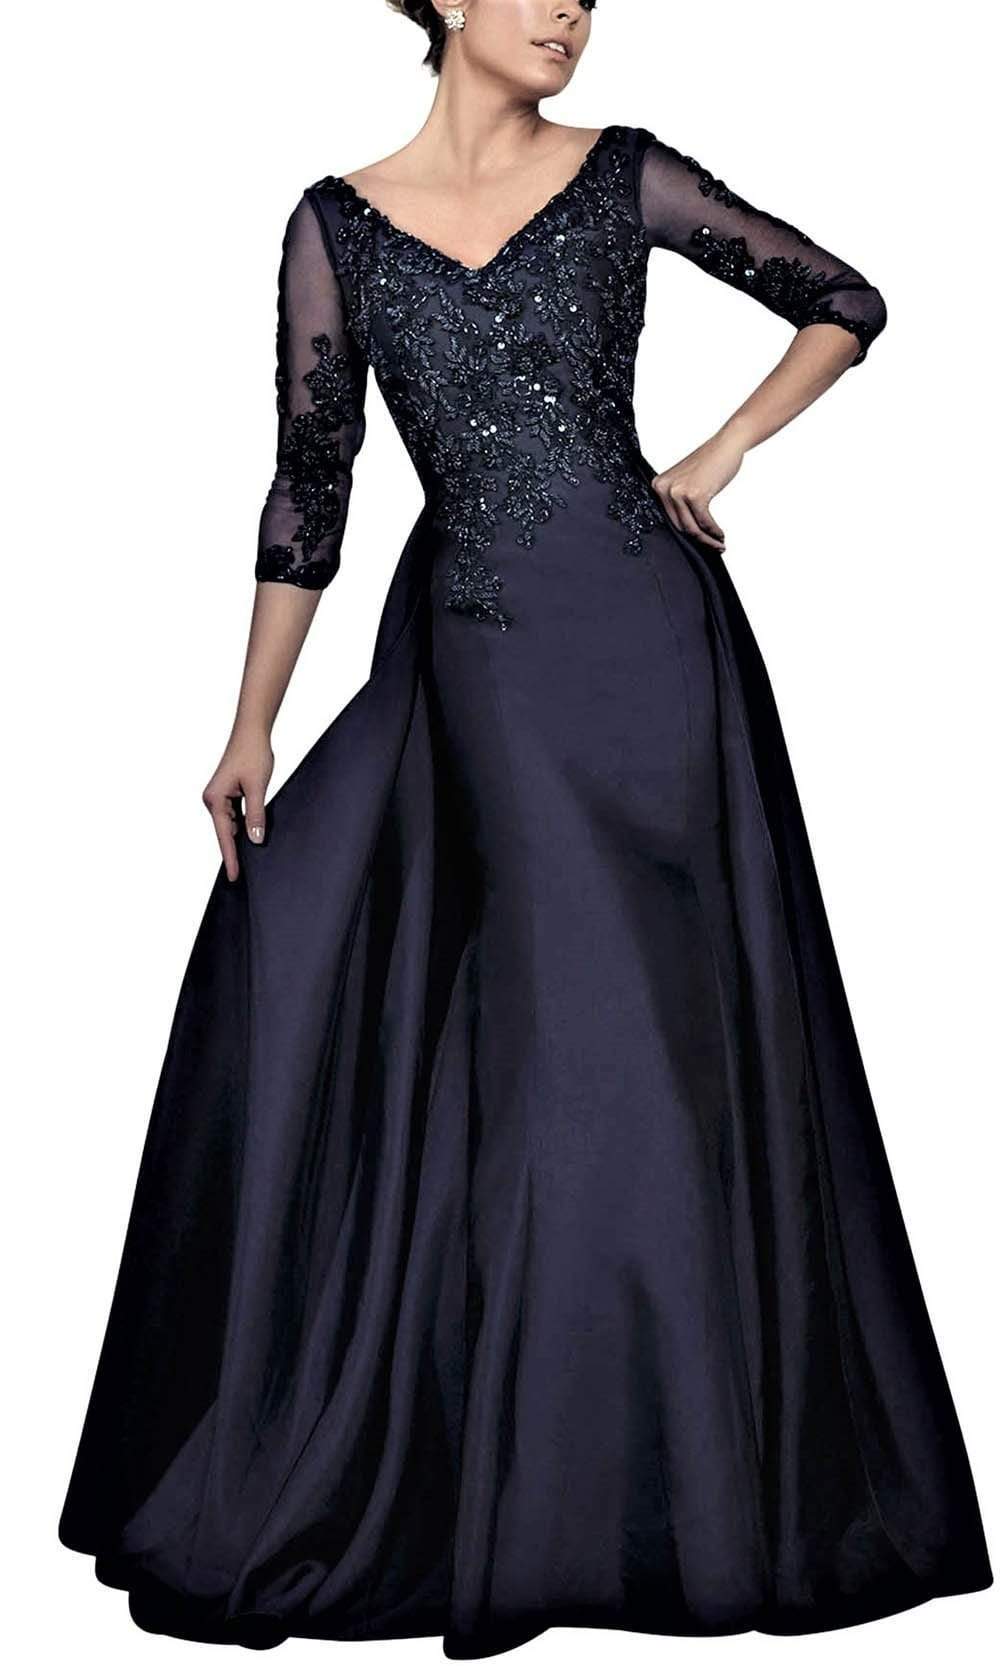 Janique - Embroidered V-Neck Sleeved Long Mermaid Gown JA3009 Special Occasion Dress Navy / 10